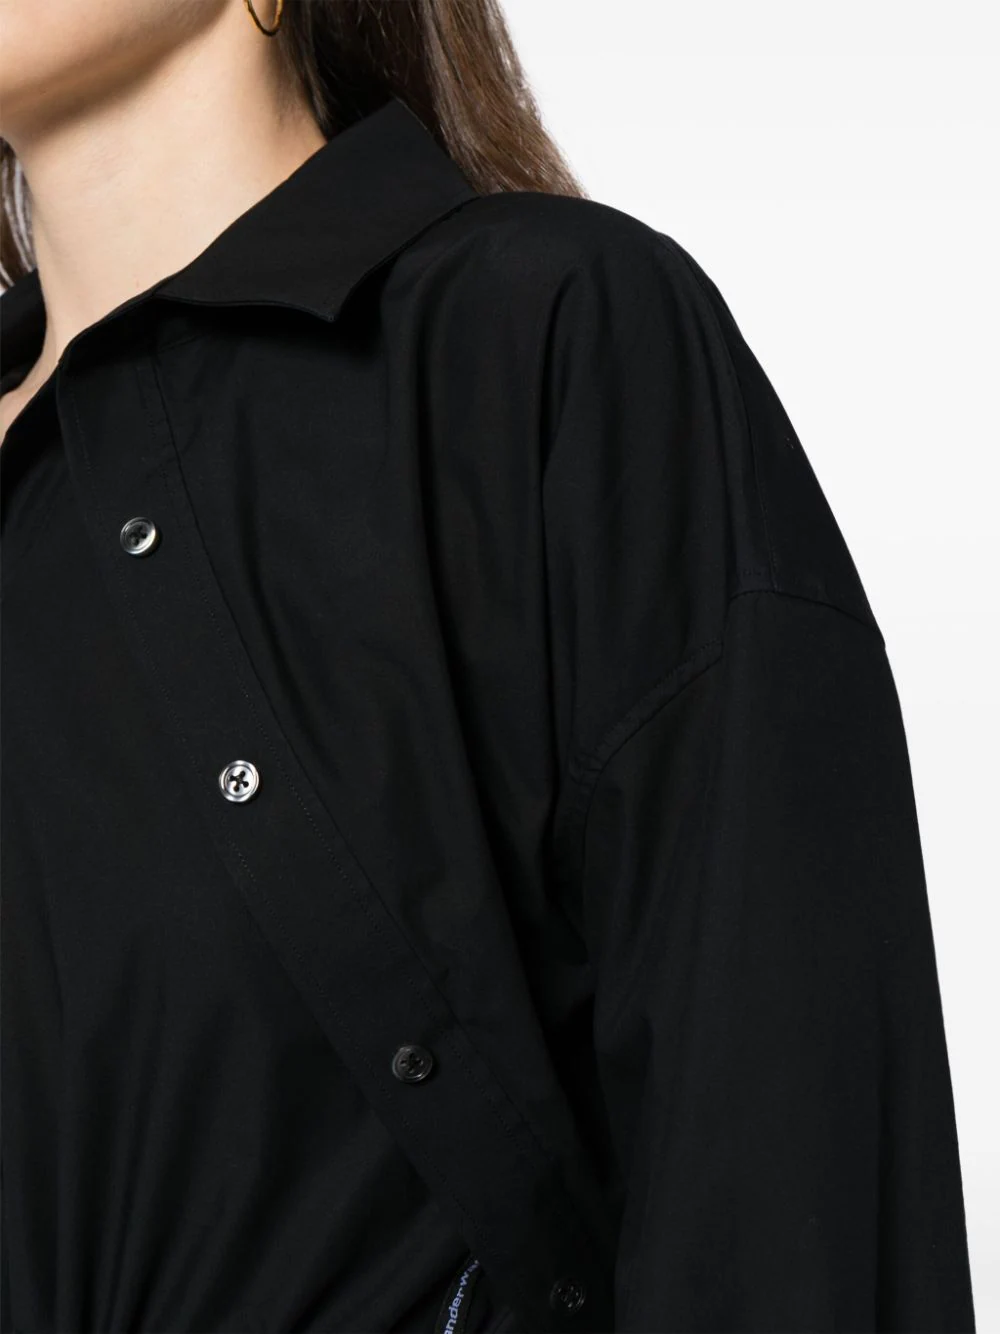 T-By-Alexander-Wang-Double-Layered-Cropped-Shirt-Black-5